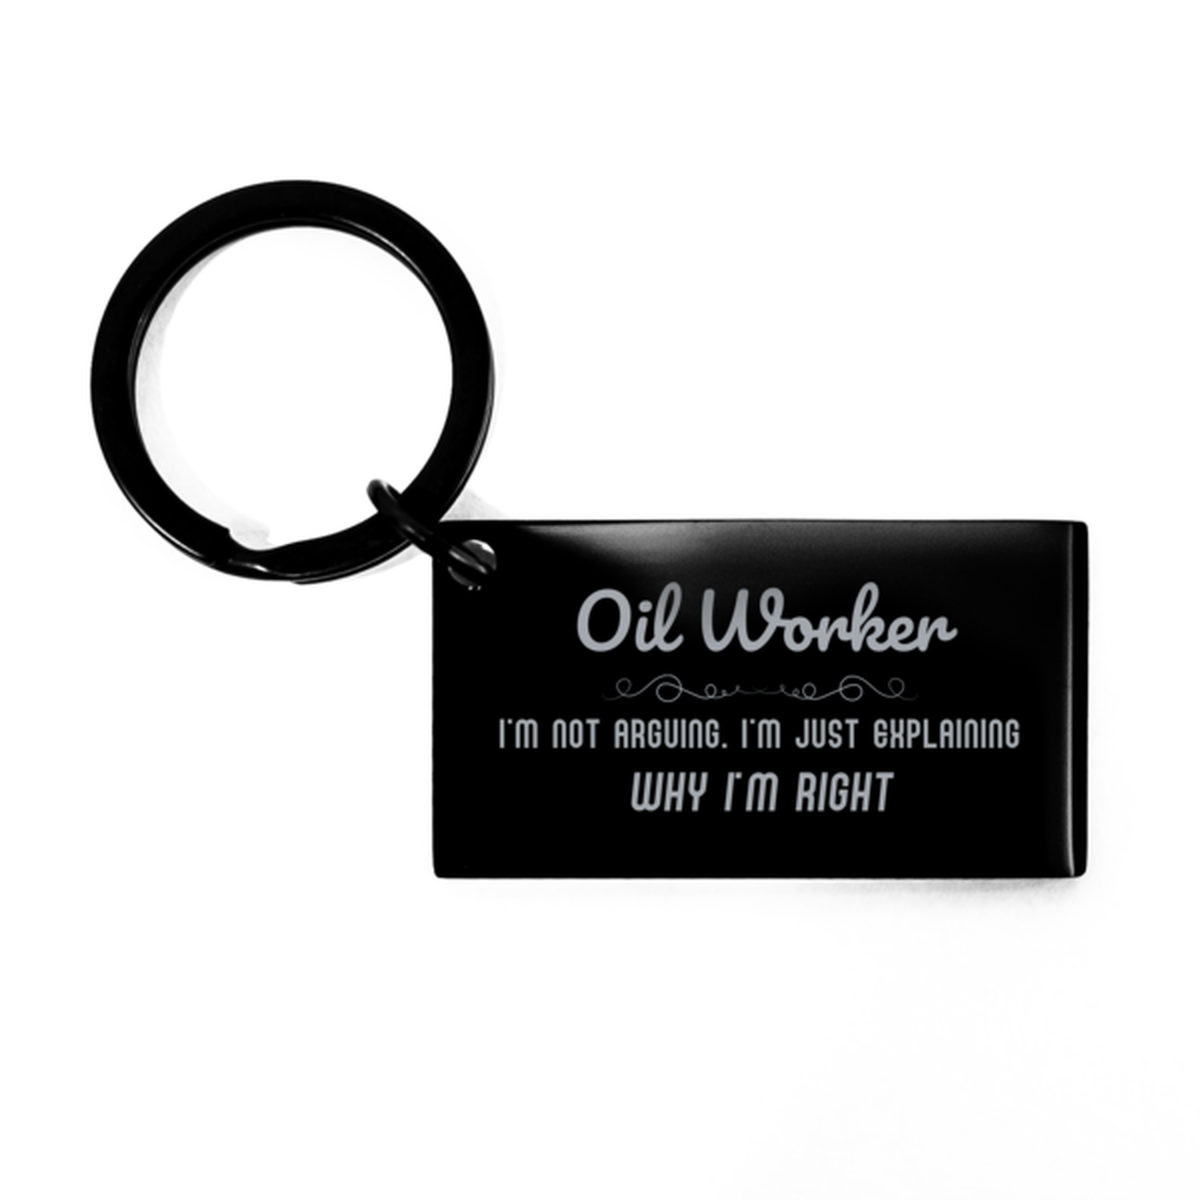 Oil Worker I'm not Arguing. I'm Just Explaining Why I'm RIGHT Keychain, Funny Saying Quote Oil Worker Gifts For Oil Worker Graduation Birthday Christmas Gifts for Men Women Coworker